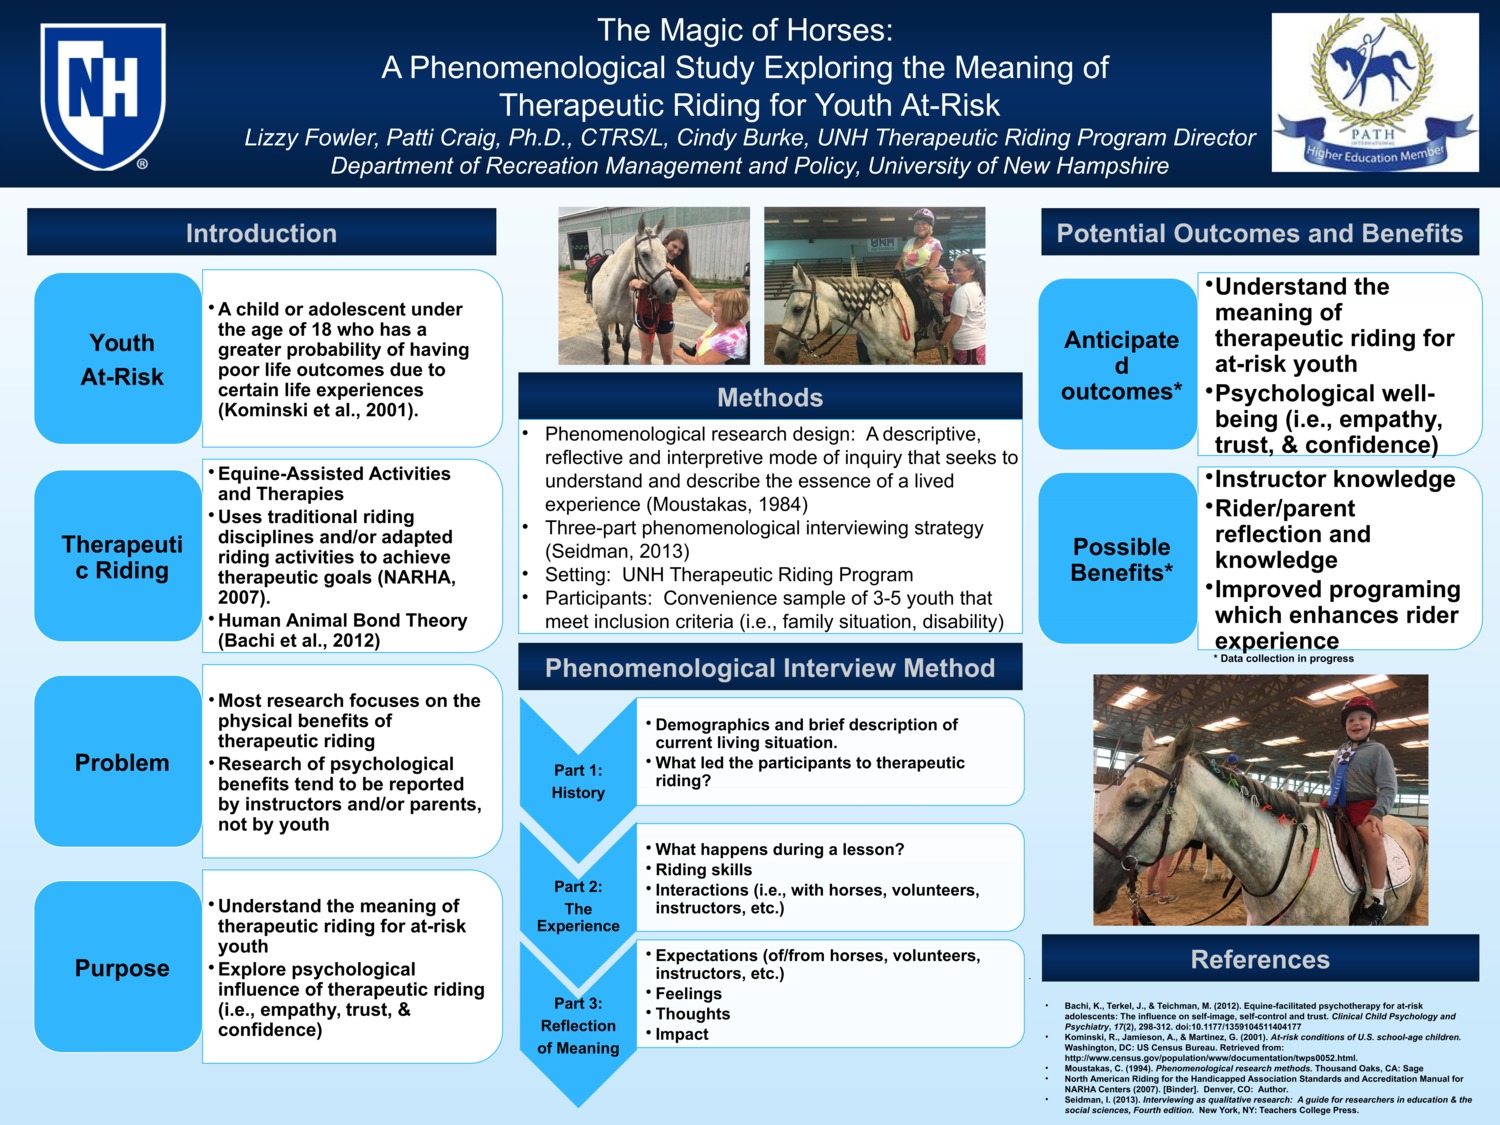 The Magic Of Horses: A Phenomenological Study Exploring The Meaning Of Therapeutic Riding For Youth At-Risk by eff1007